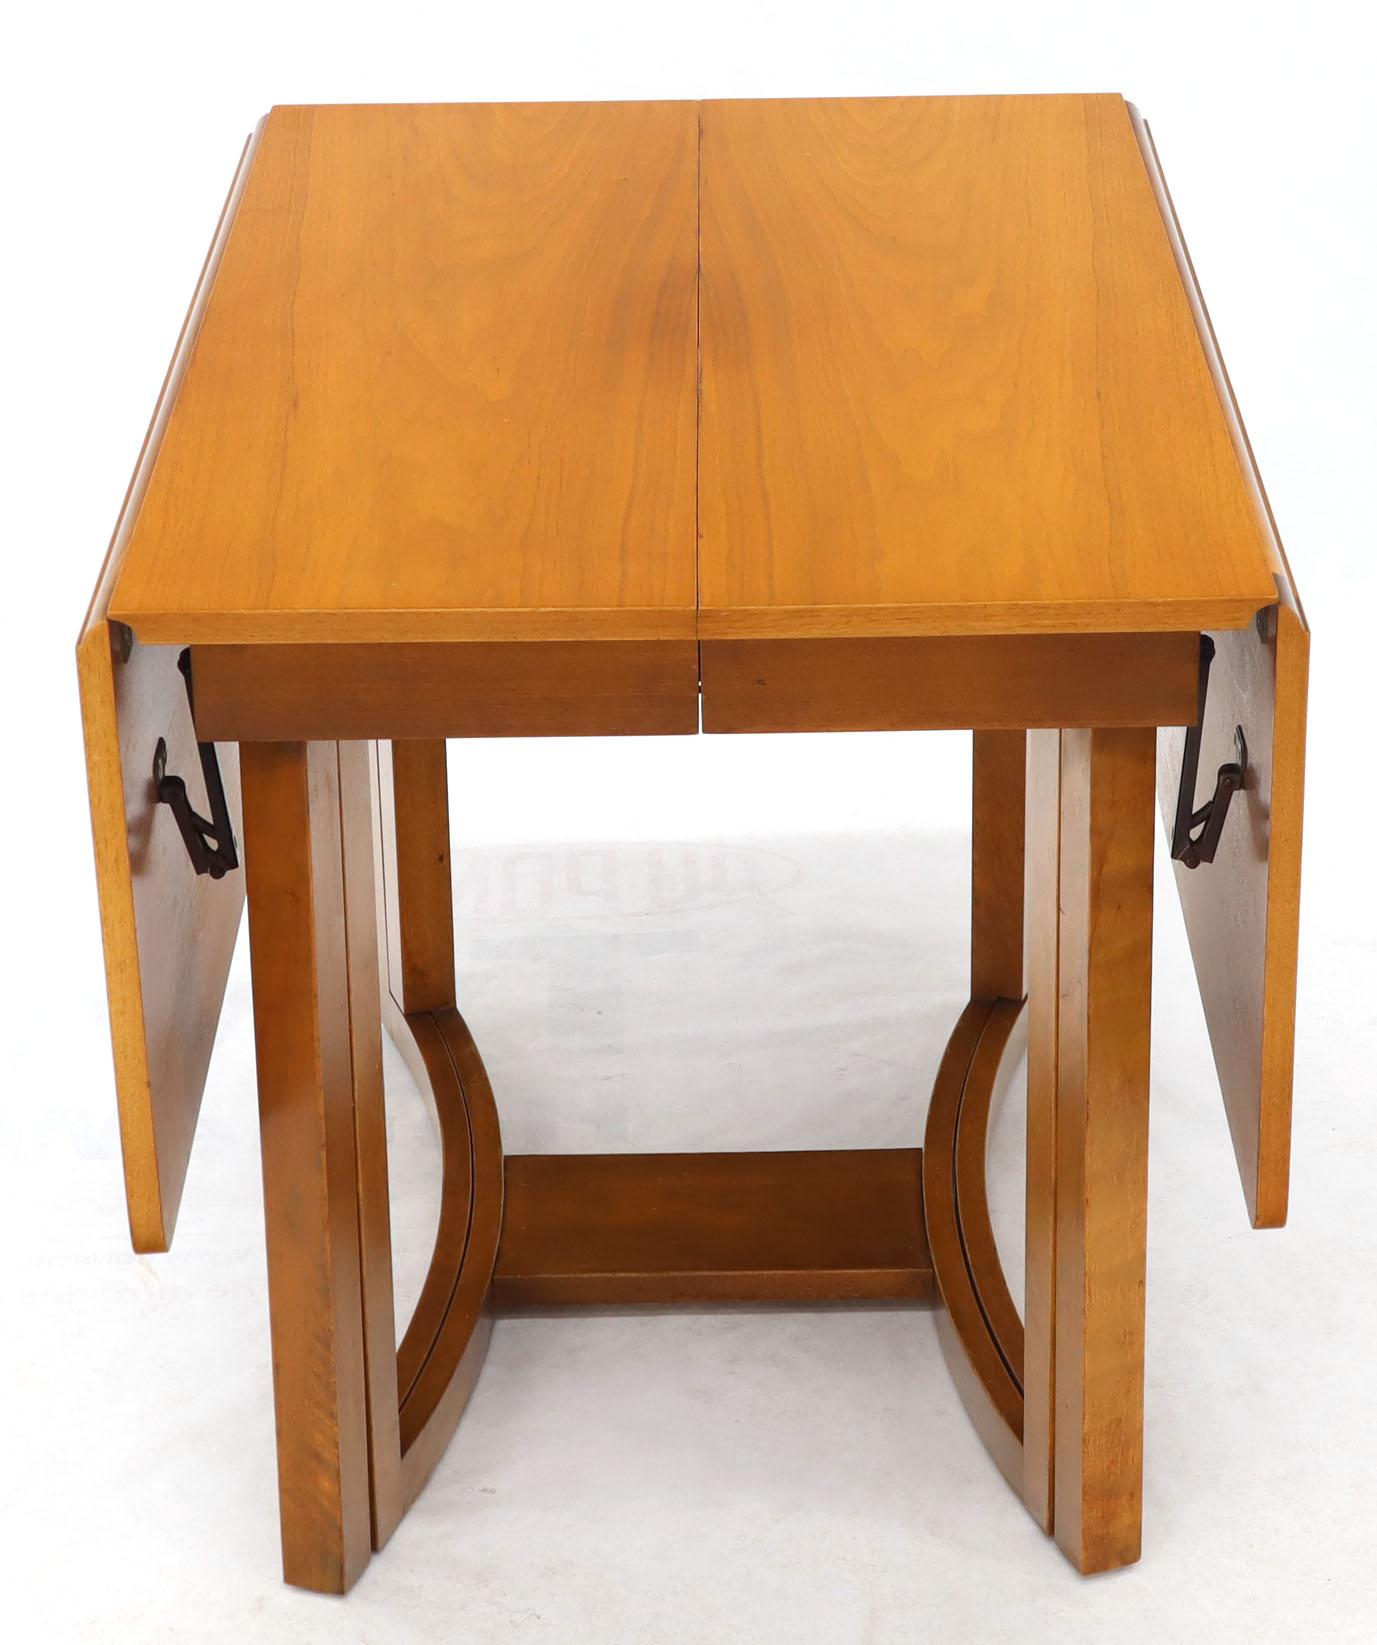 Midcentury Light Walnut Drop Leaf Expandable Dining Table, Three Leafs Boards im Angebot 2